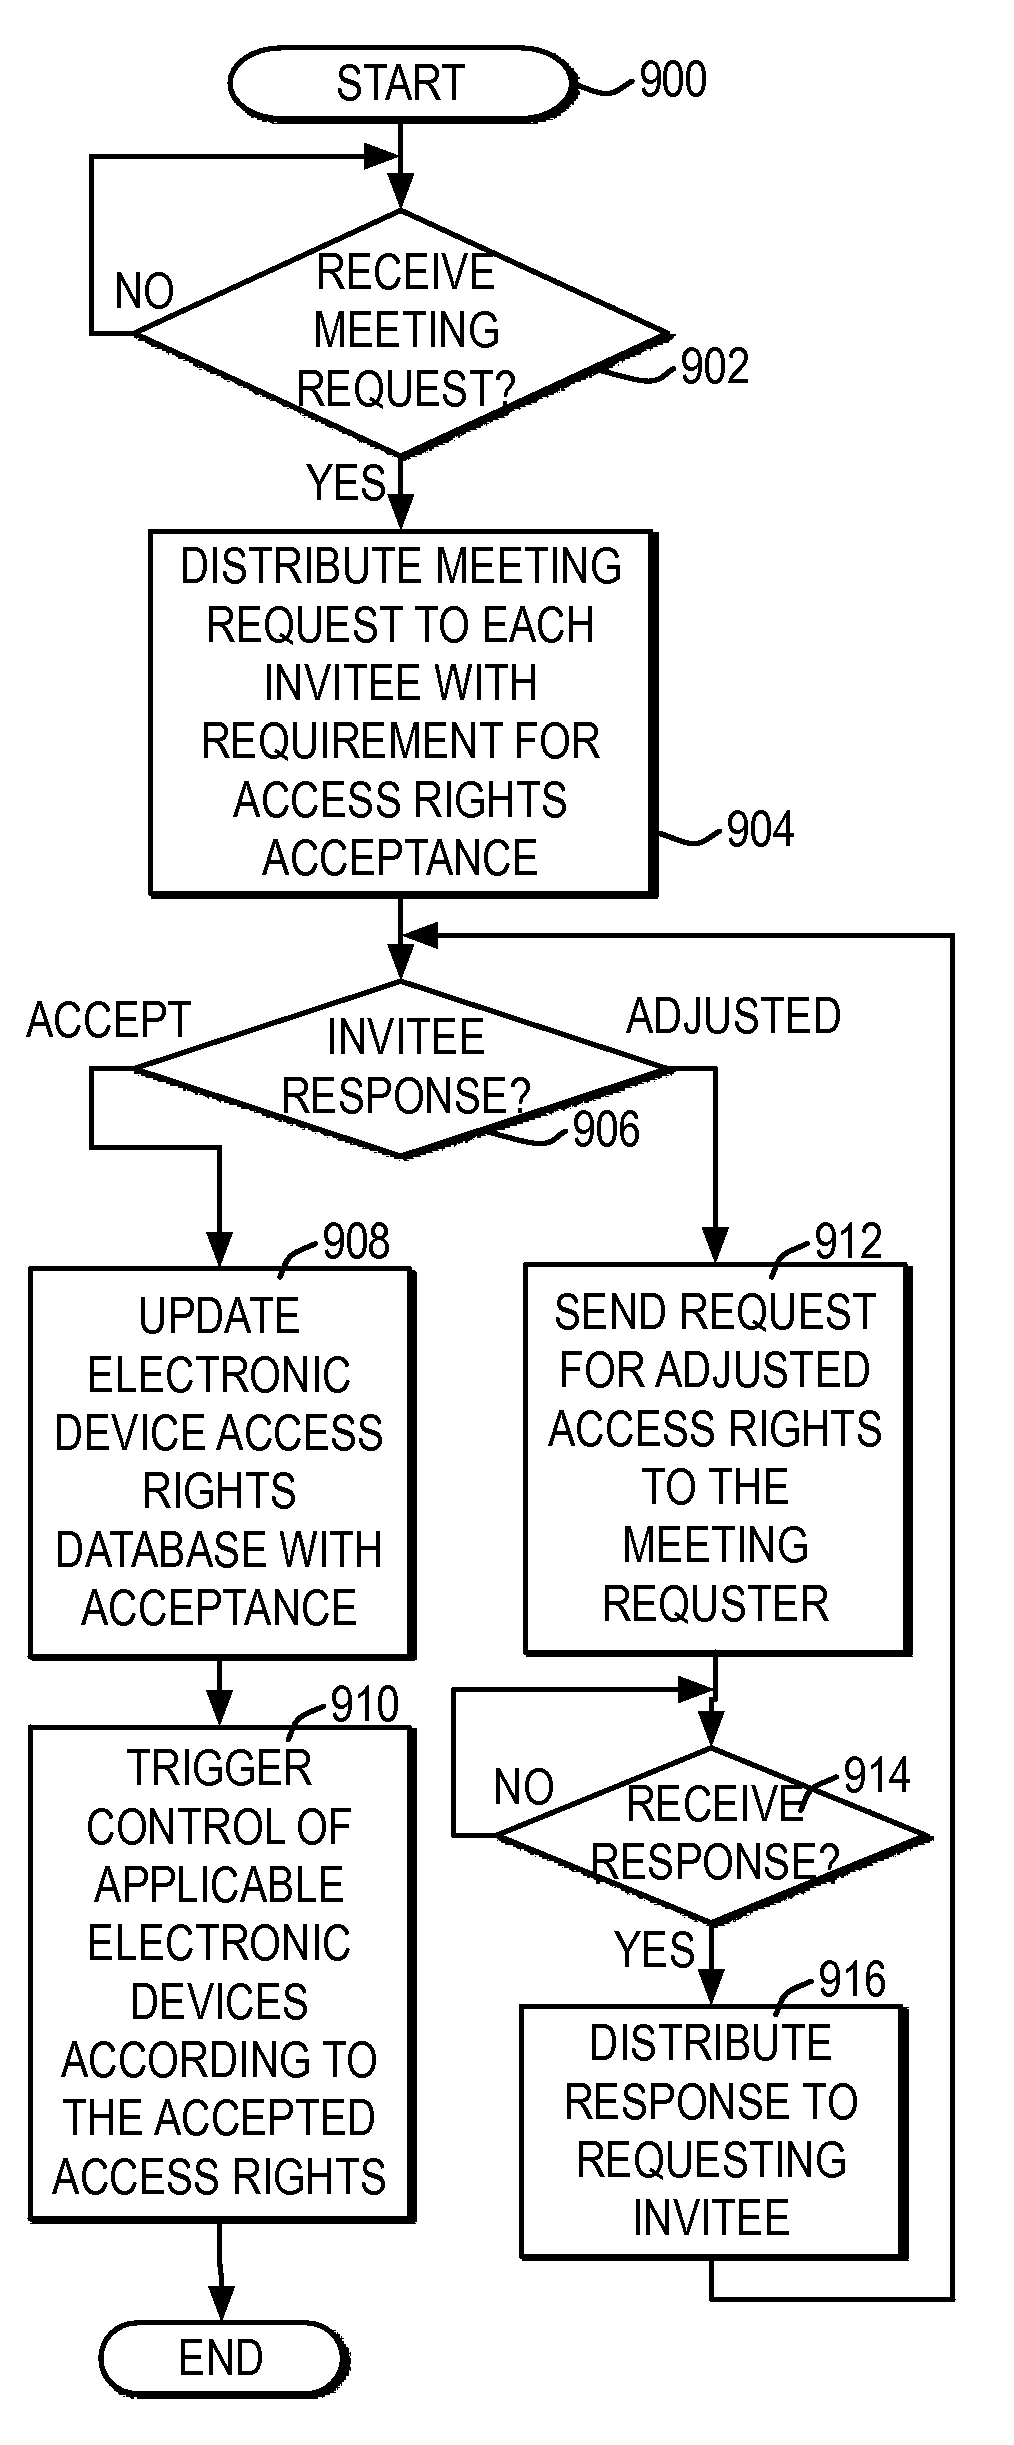 Controlling Access to Electronic Devices by Meeting Invitees